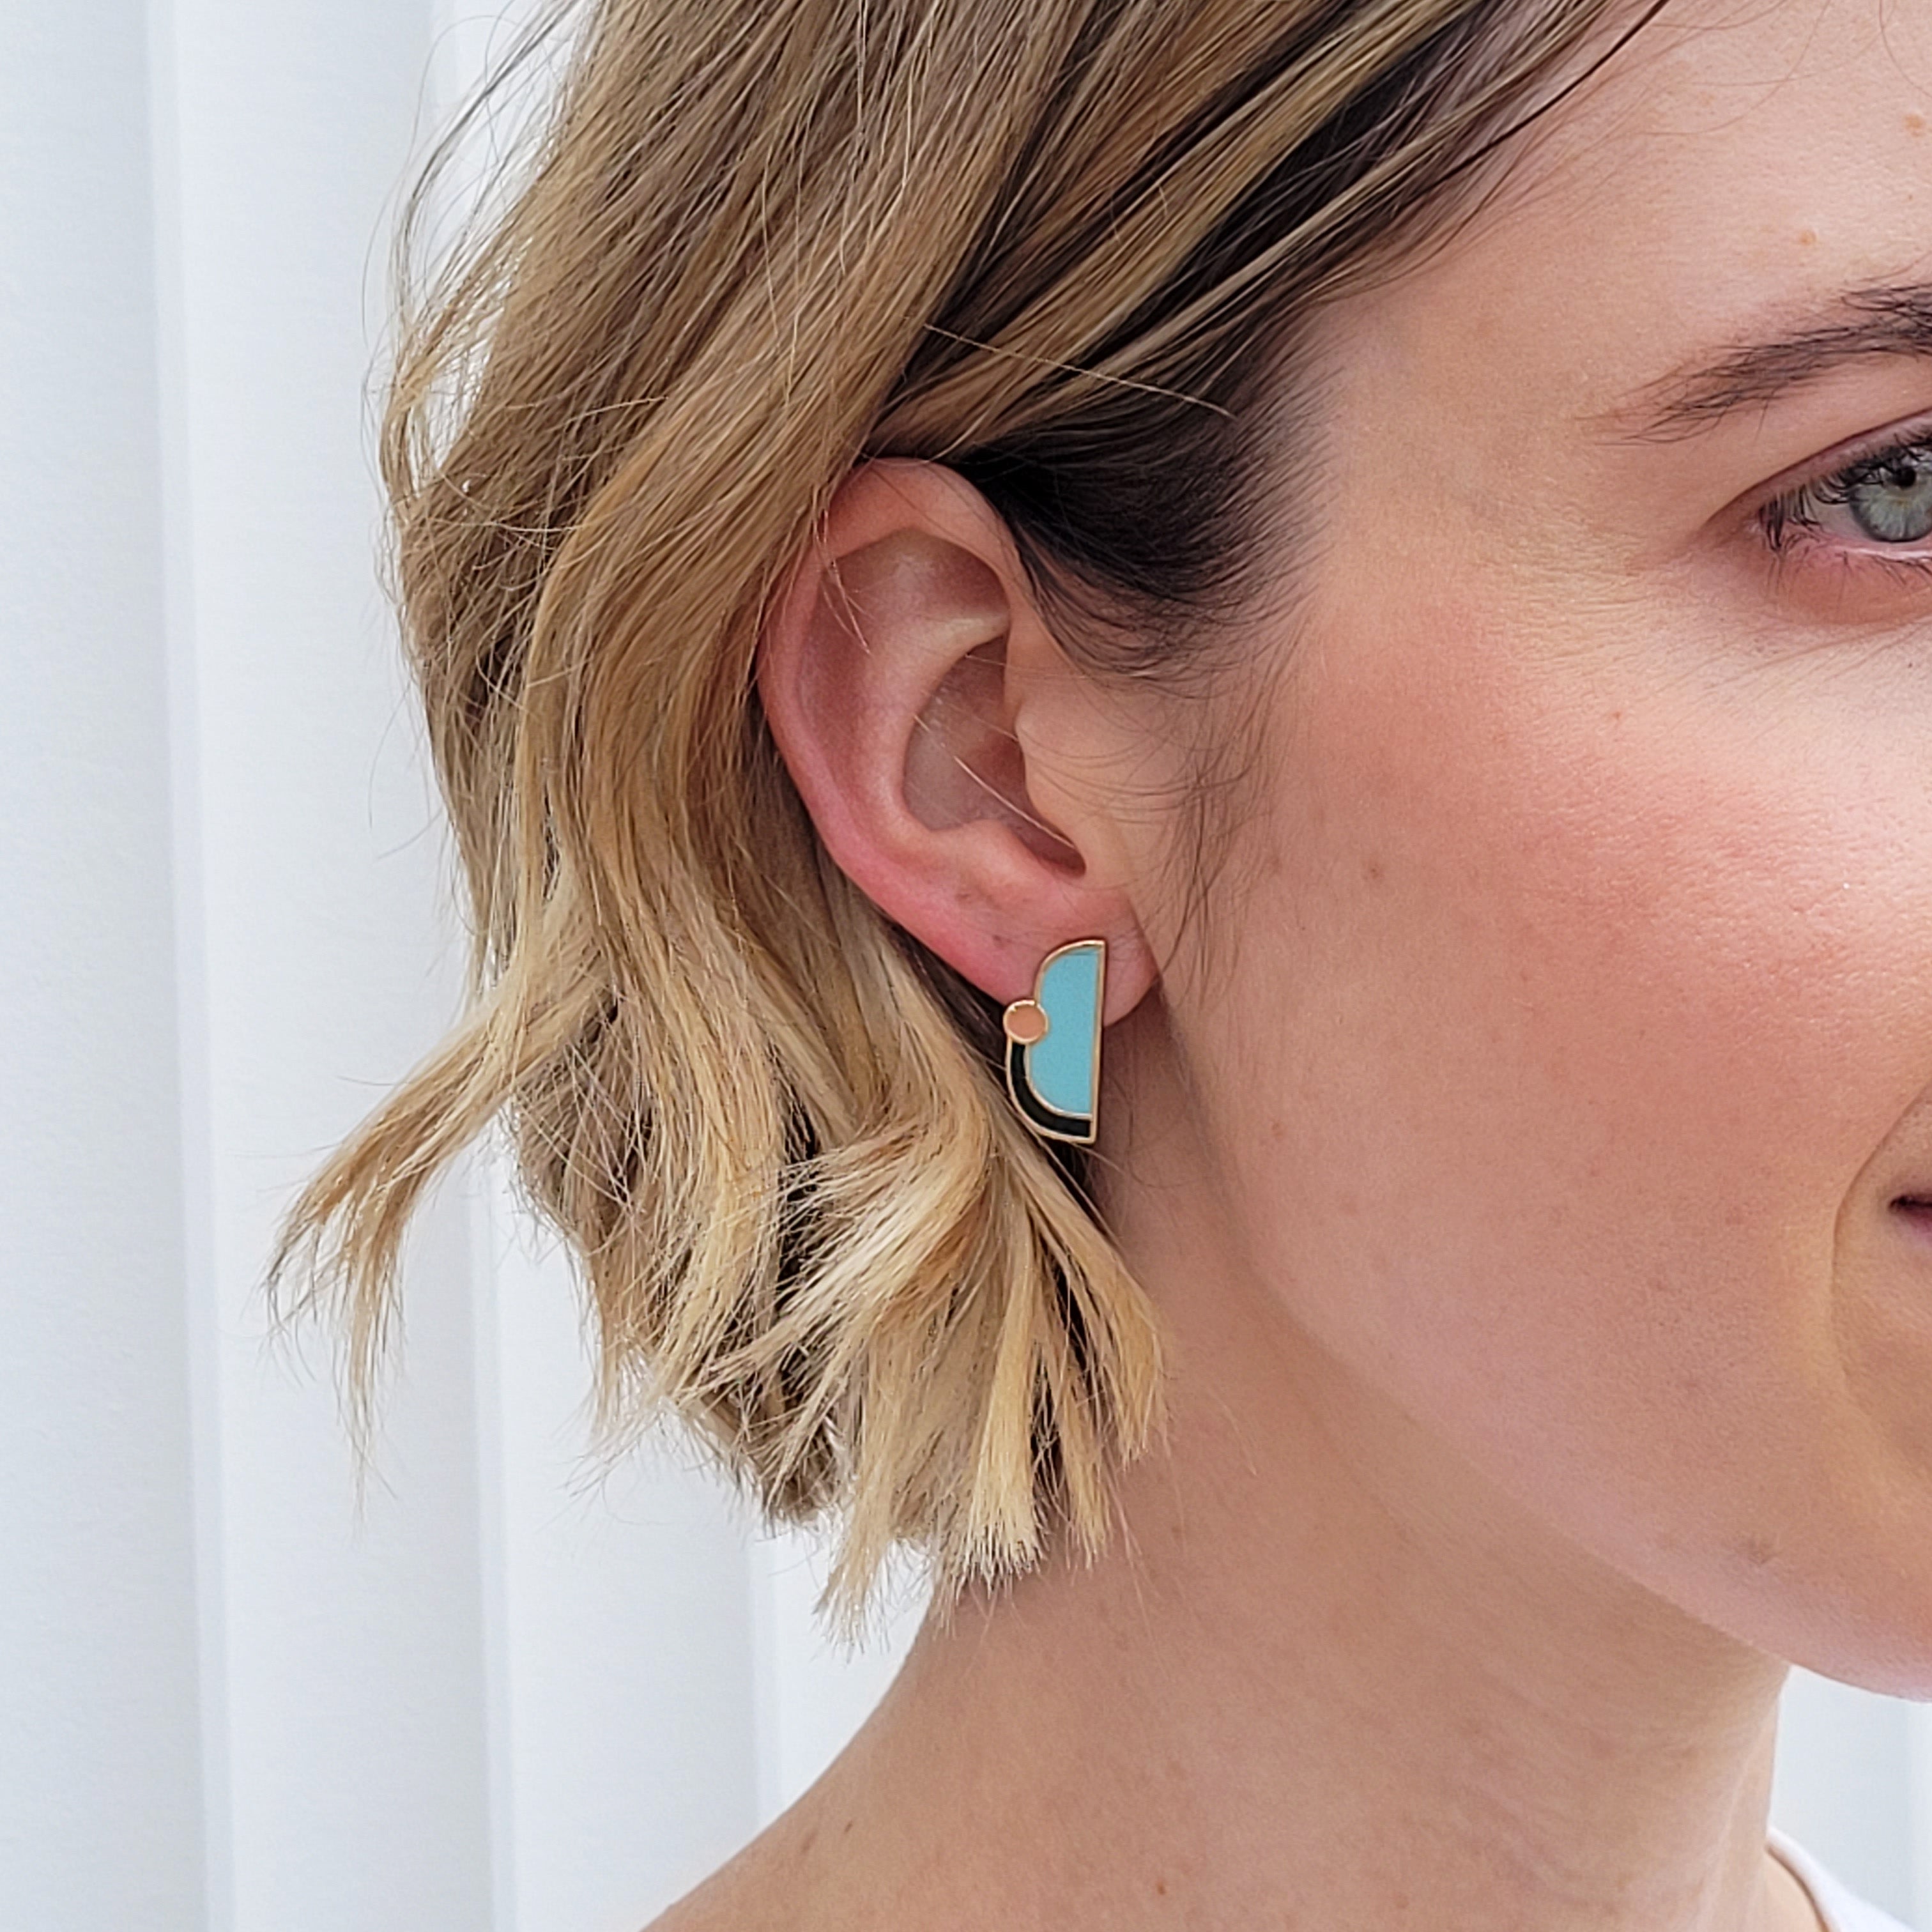 A lady with short blonde hair models a close up, side view of the Division studs in ballet blue.